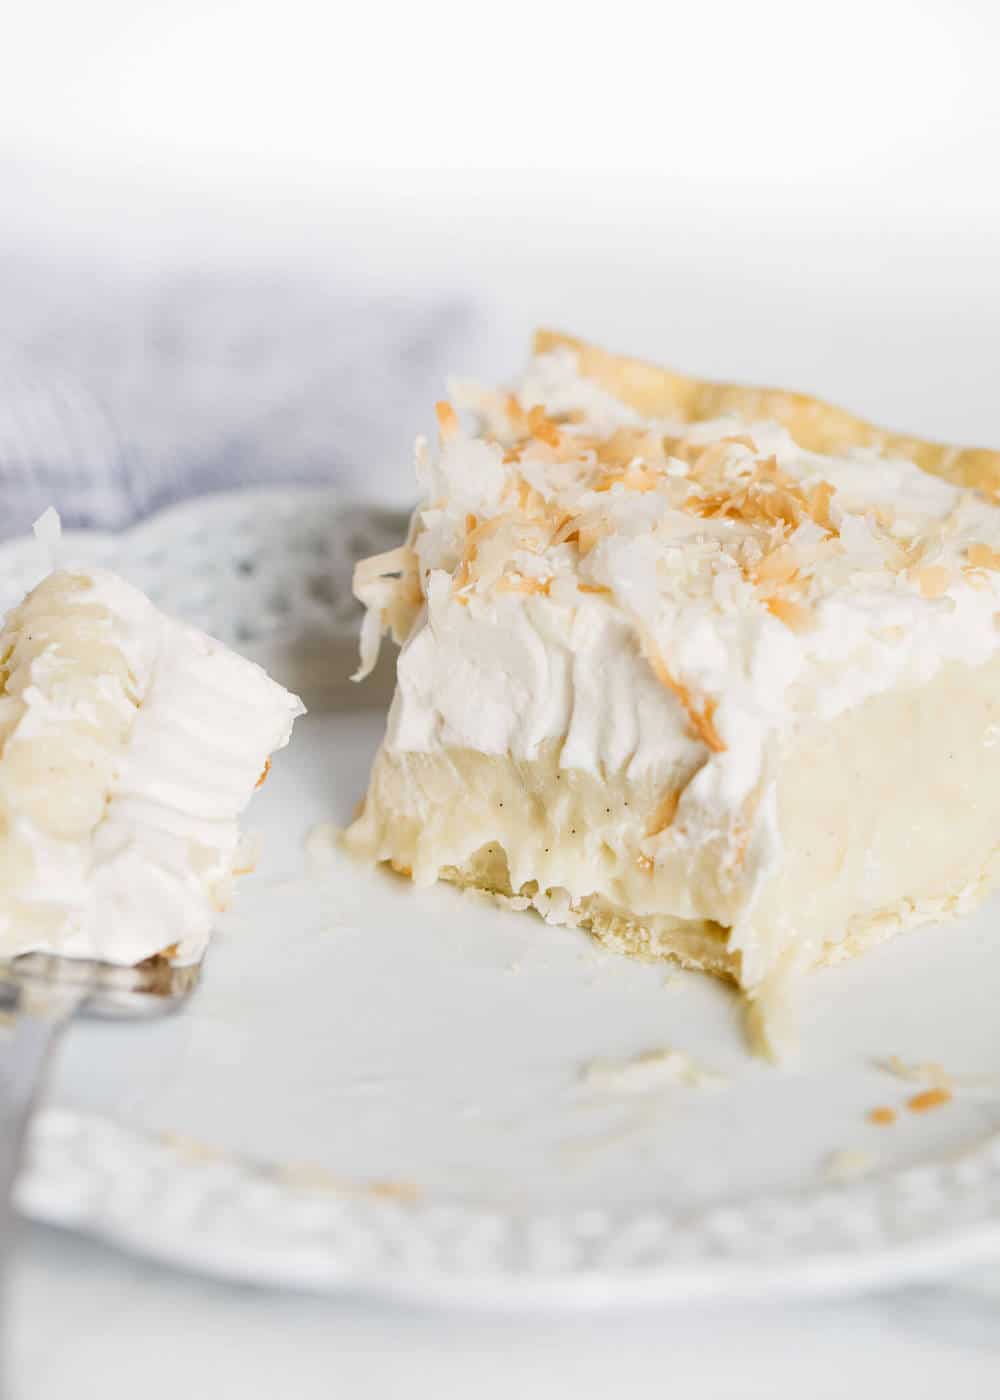 Slice of coconut pie with bite taken out.